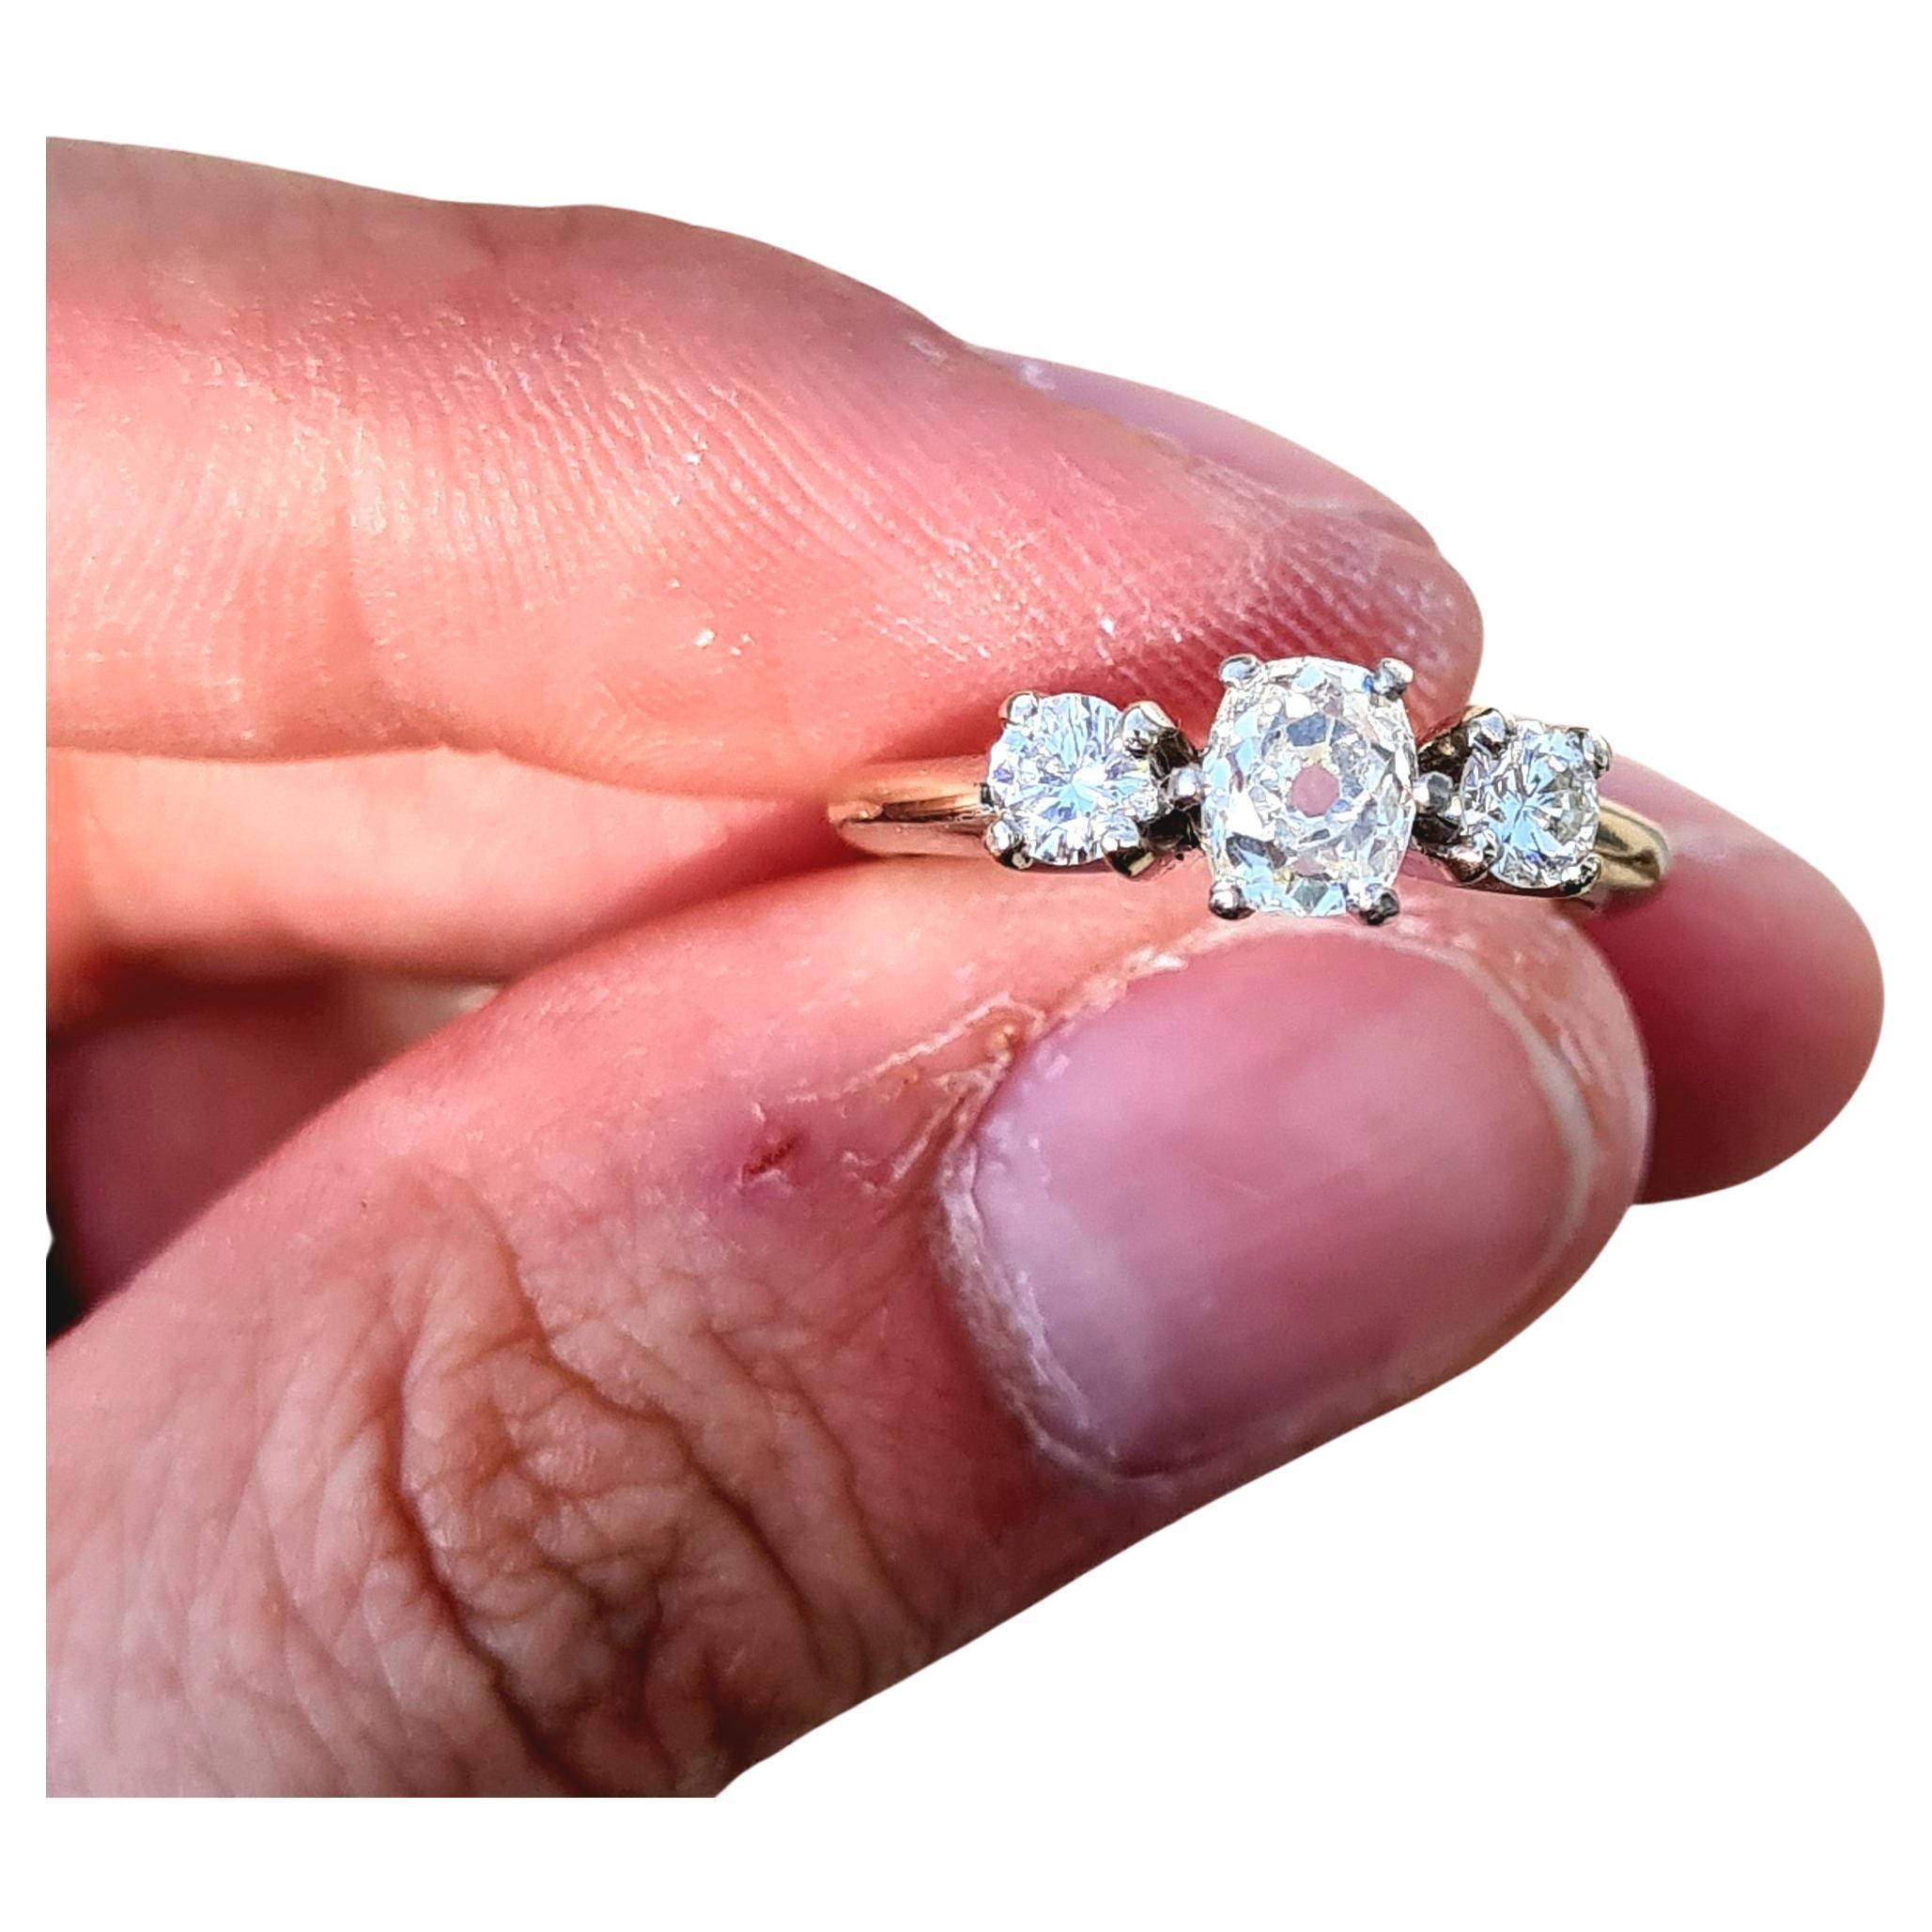 Solid 14k White Gold Old Mine Cut Diamond Ring For Sale 1